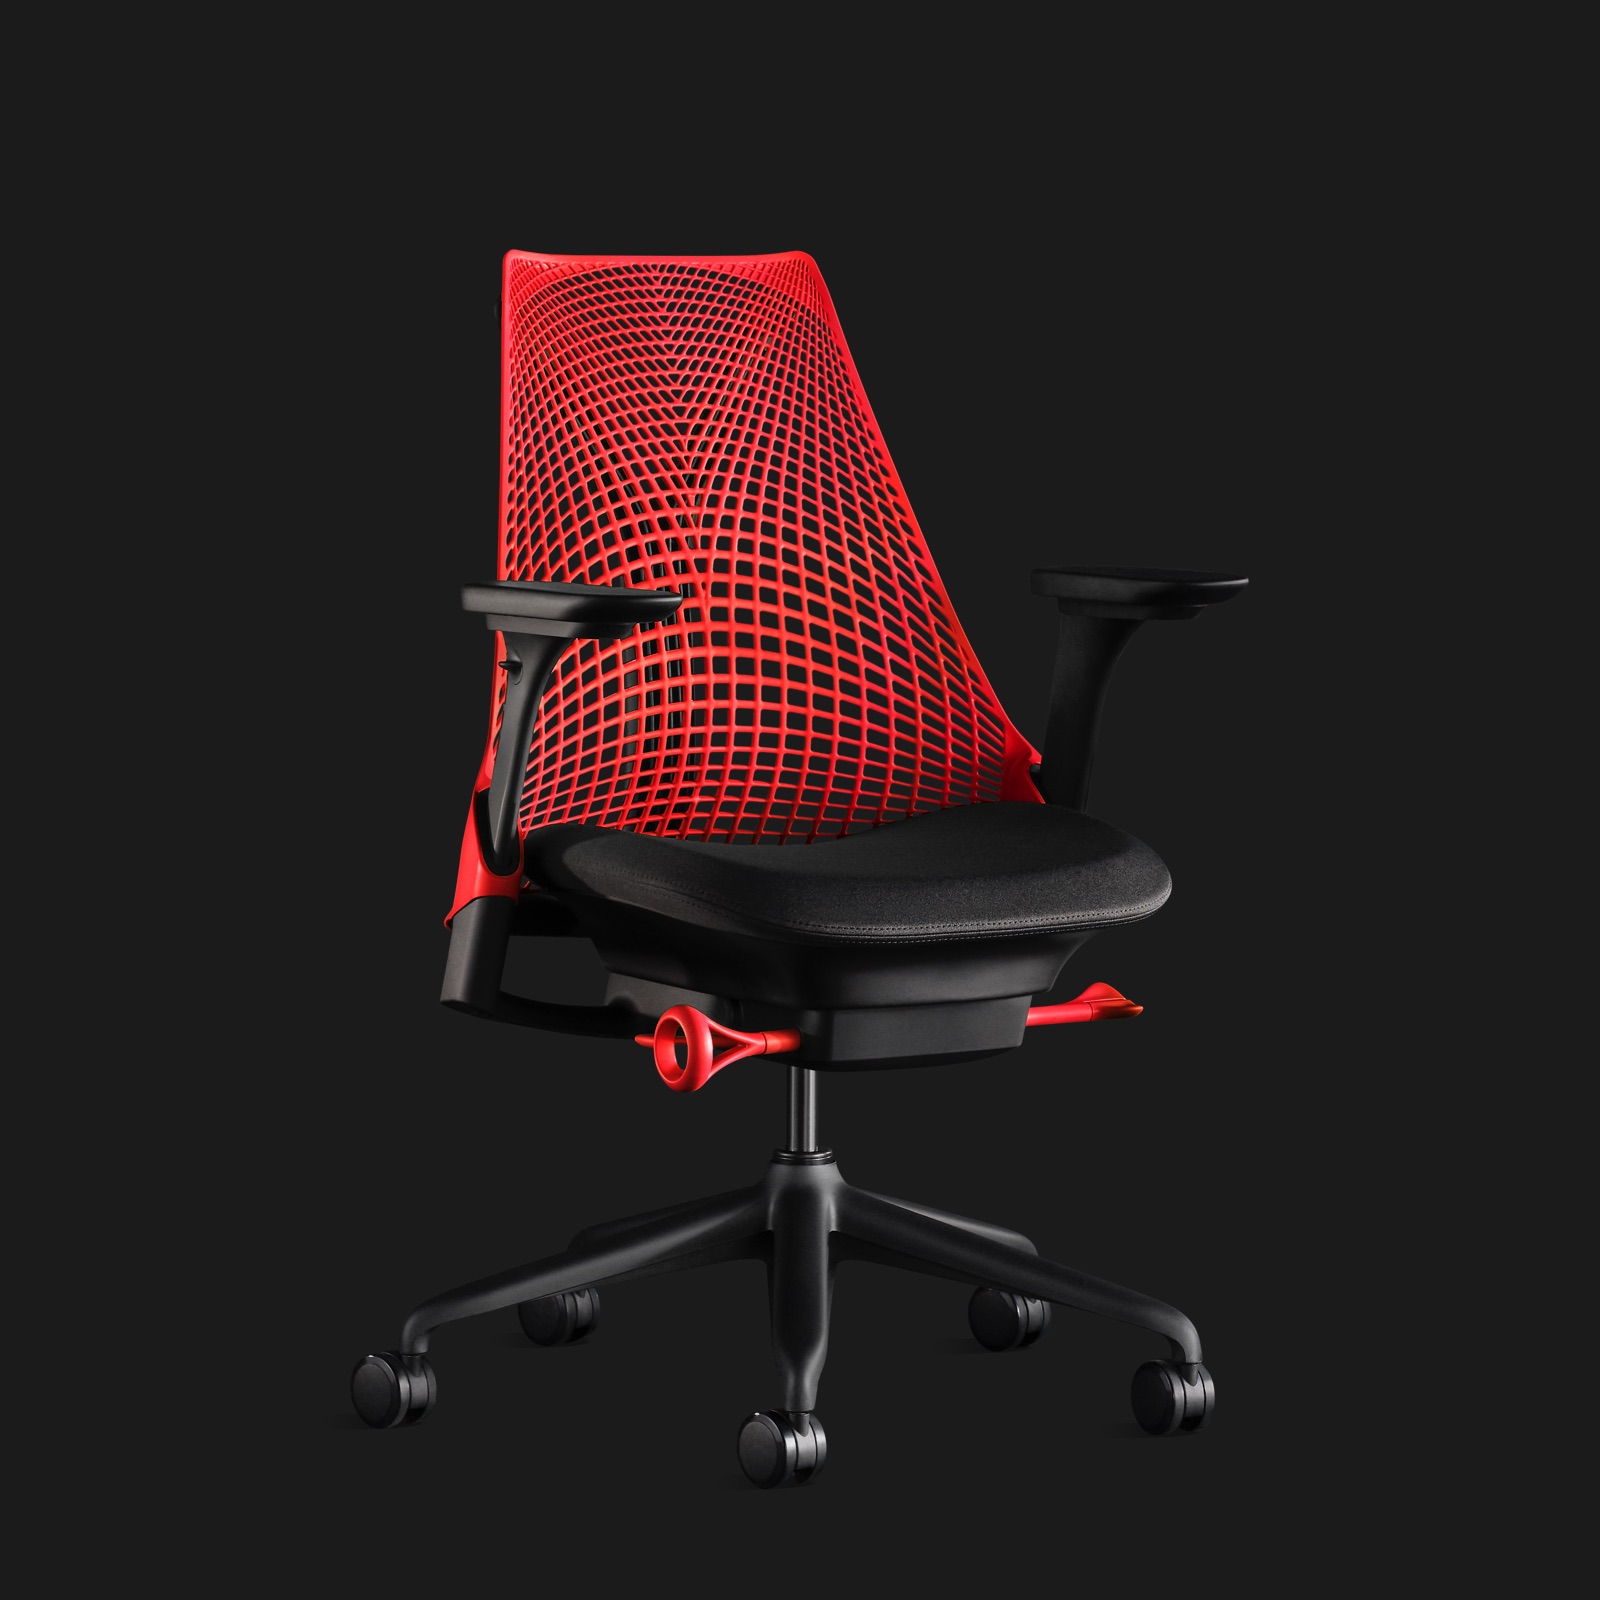 A red Sayl Chair, shown at an angle, on a black background.